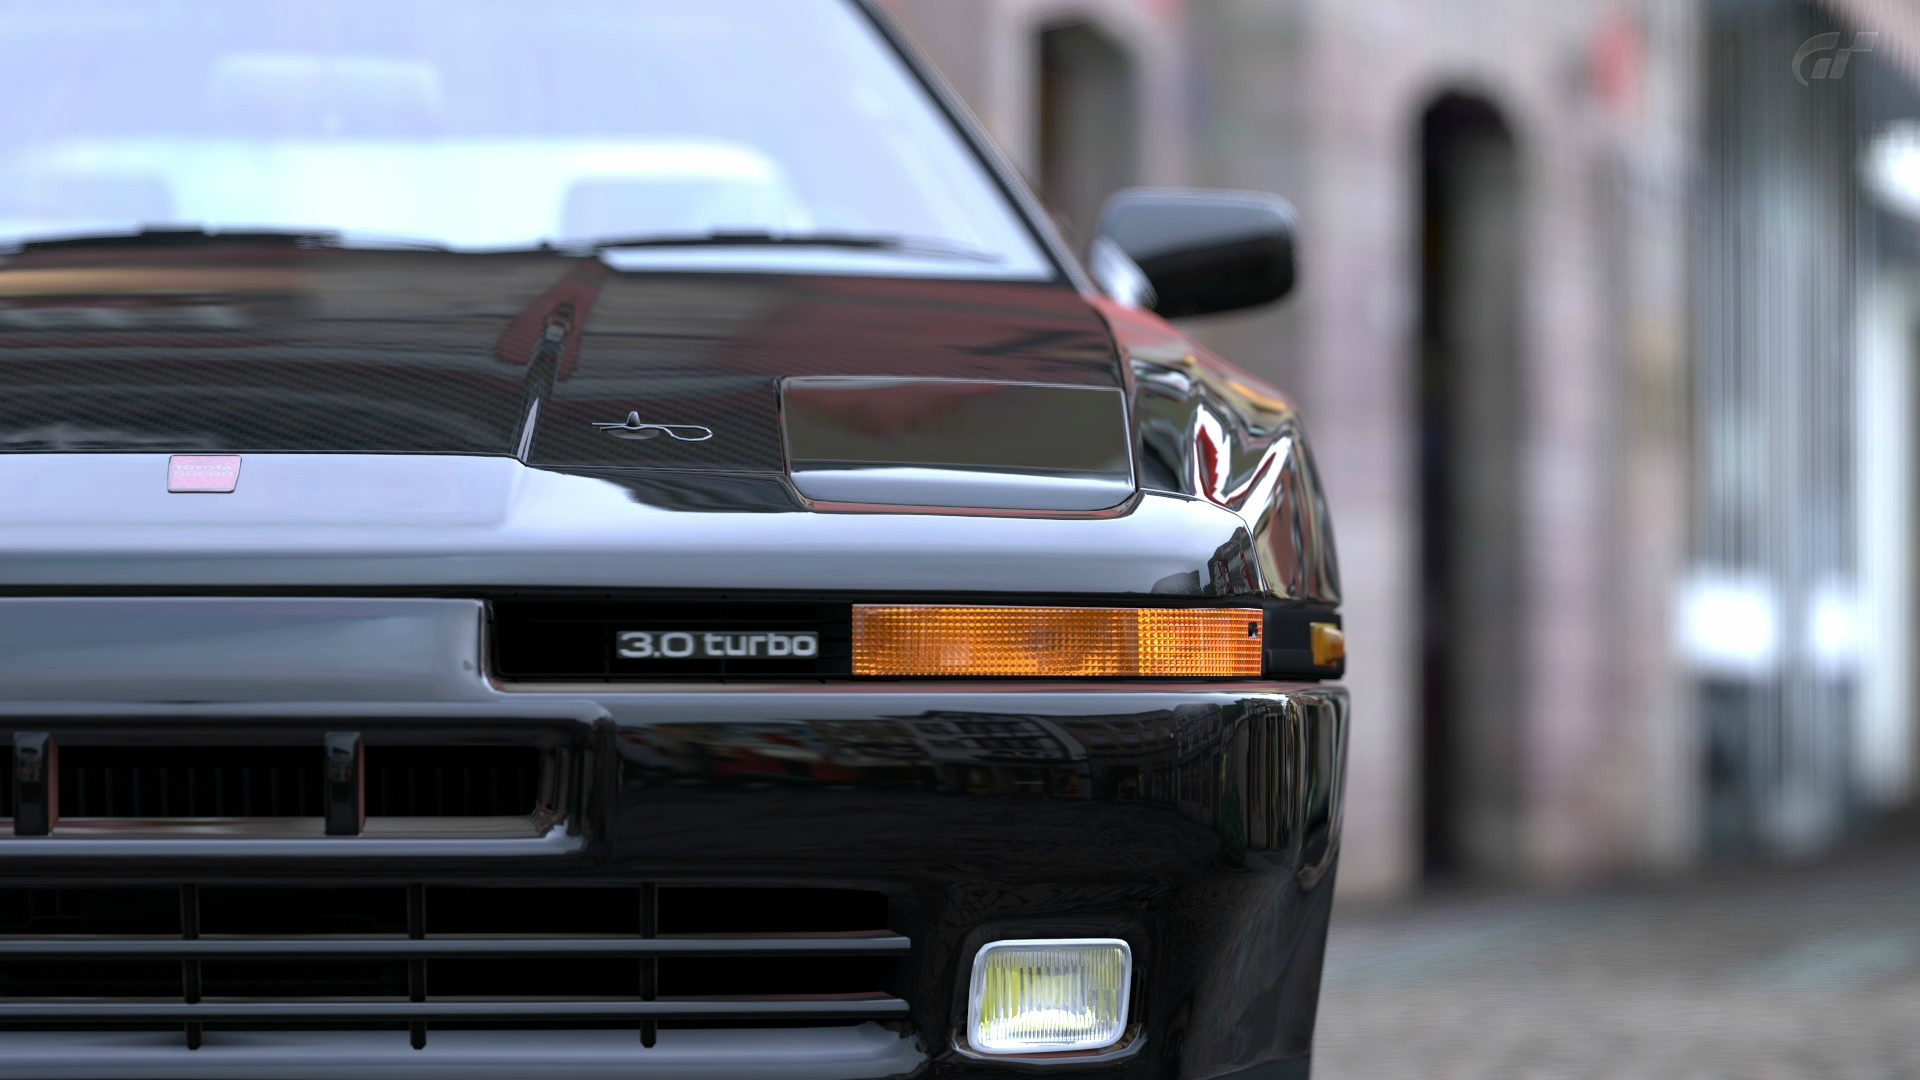 1920x1080 Sorry, I don't have Phone Wallpaper for MK3 Supra but PC